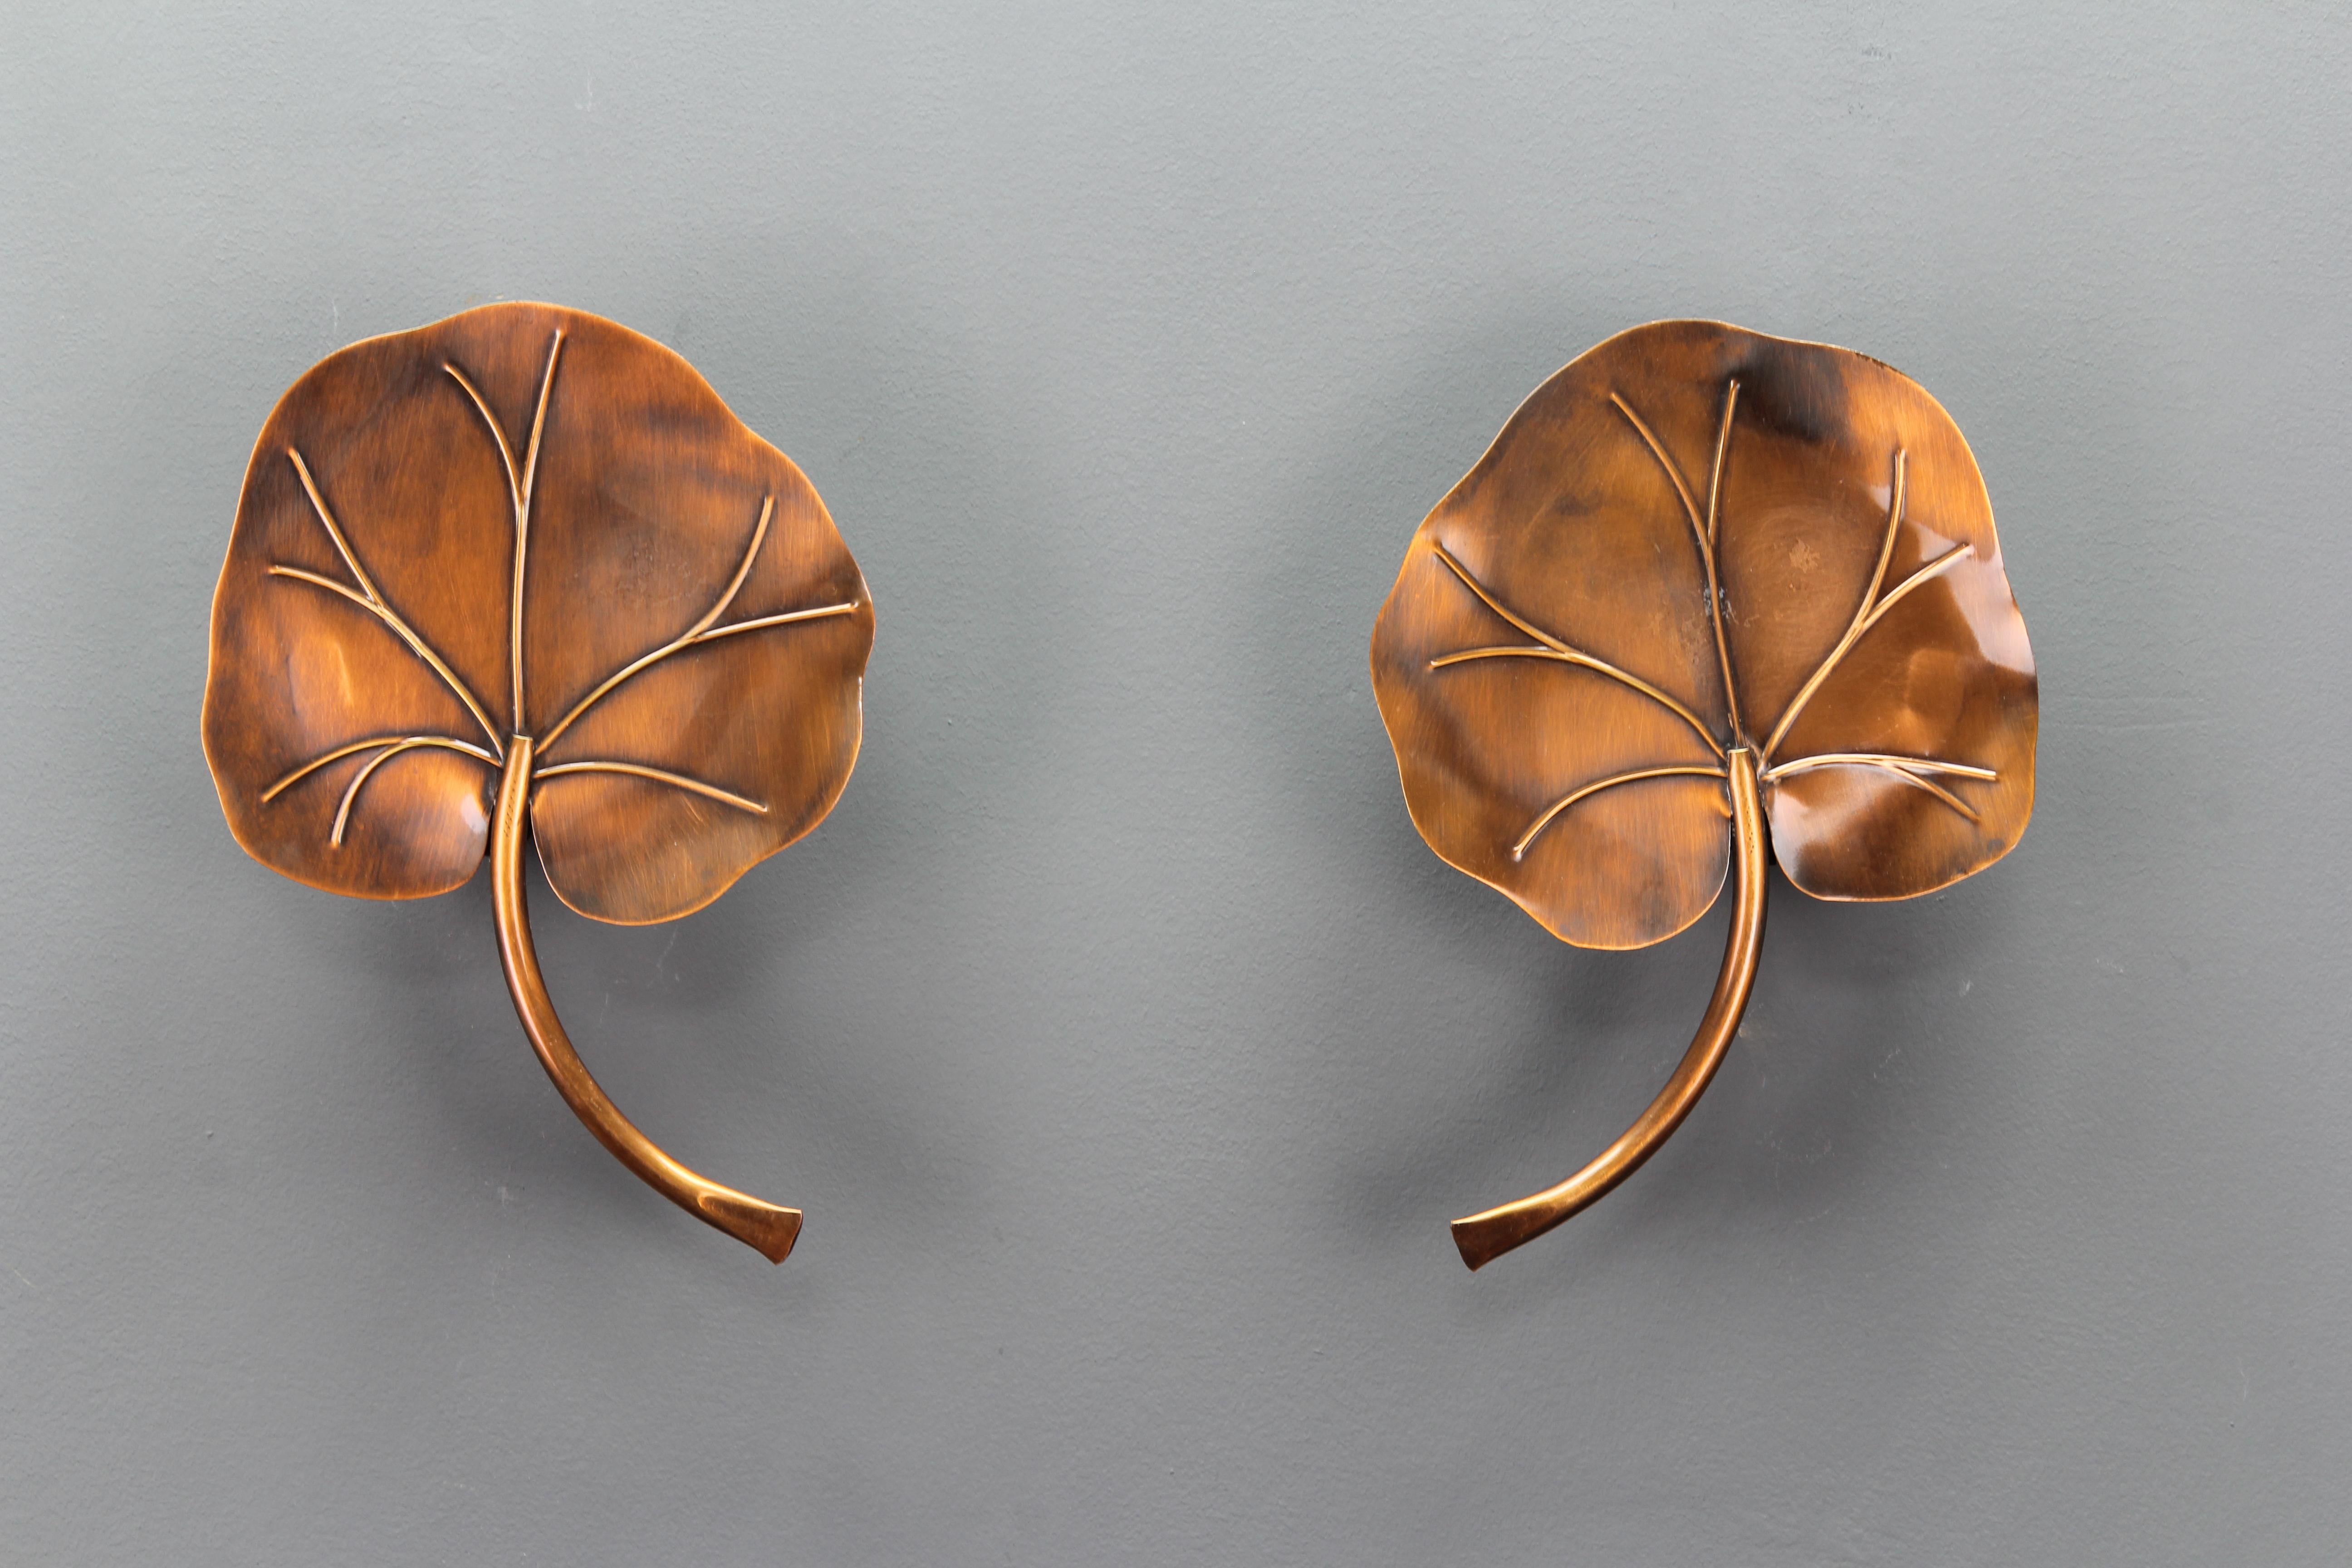 A pair of French Mid-Century Modern brass water lily leaf sconces from circa 1980.
This adorable pair of waterlily leaf-shaped sconces in copper-toned brass each have one new socket for an E14-size light bulb.
Dimensions: height: 26 cm / 10.23 in;